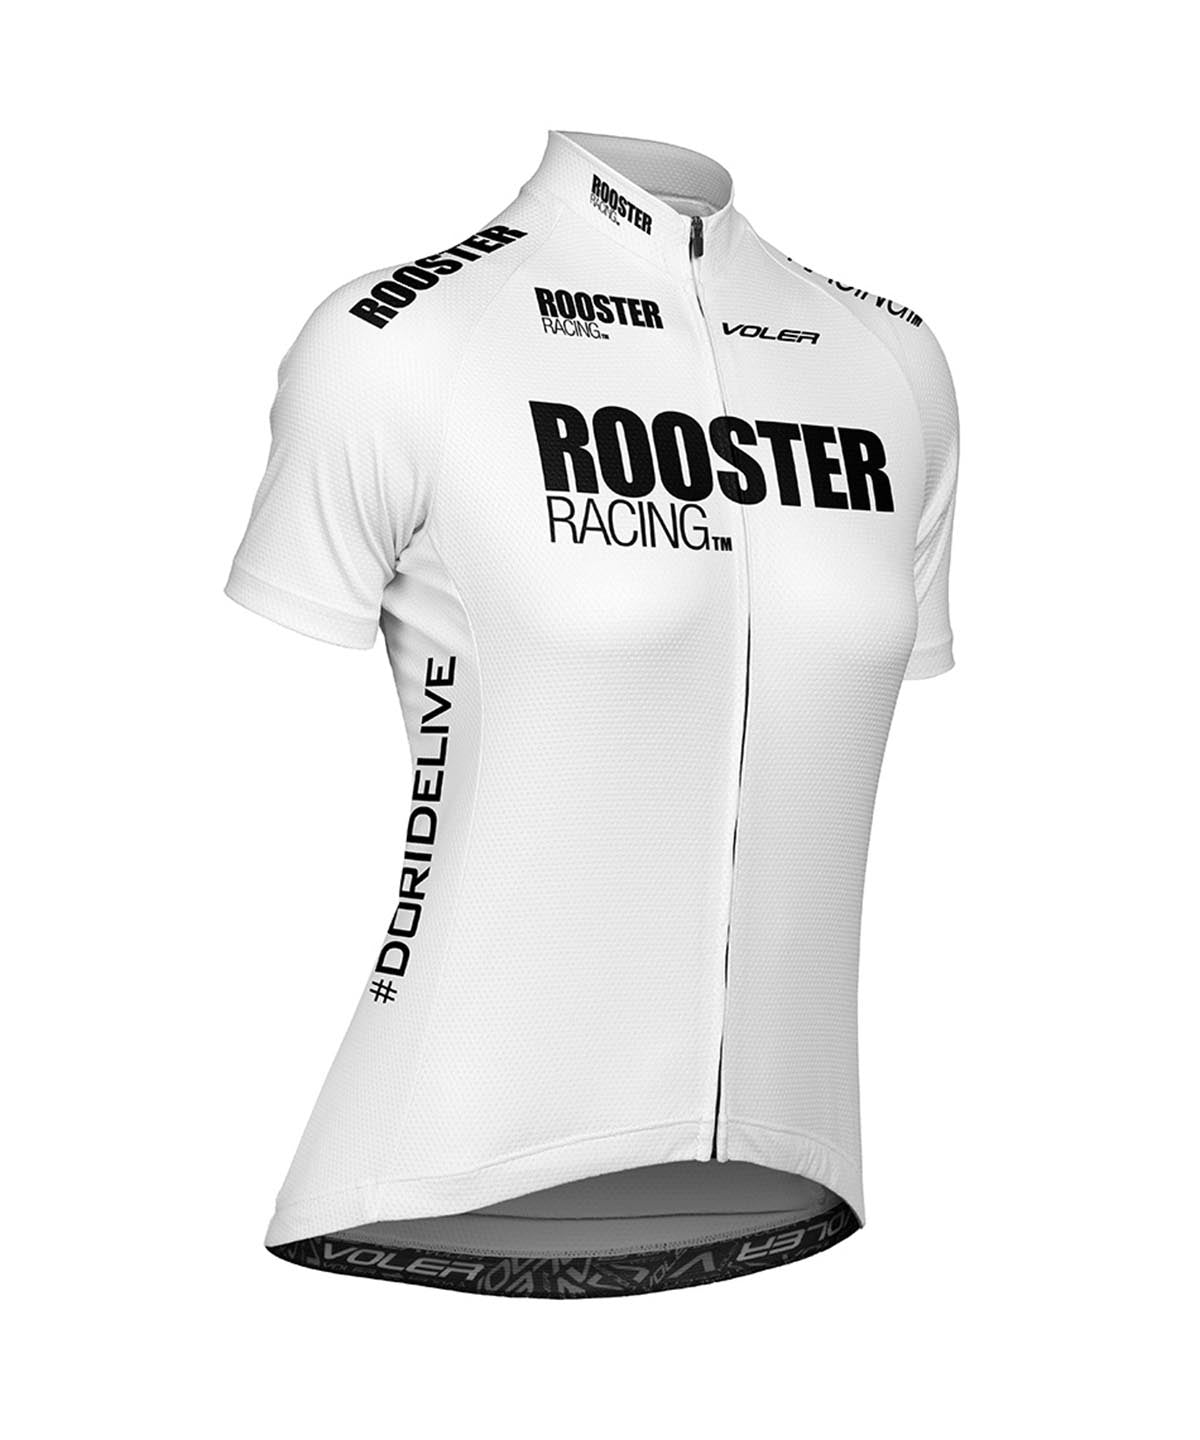 W. PELOTON CLUB JERSEY - ROOSTER RACING